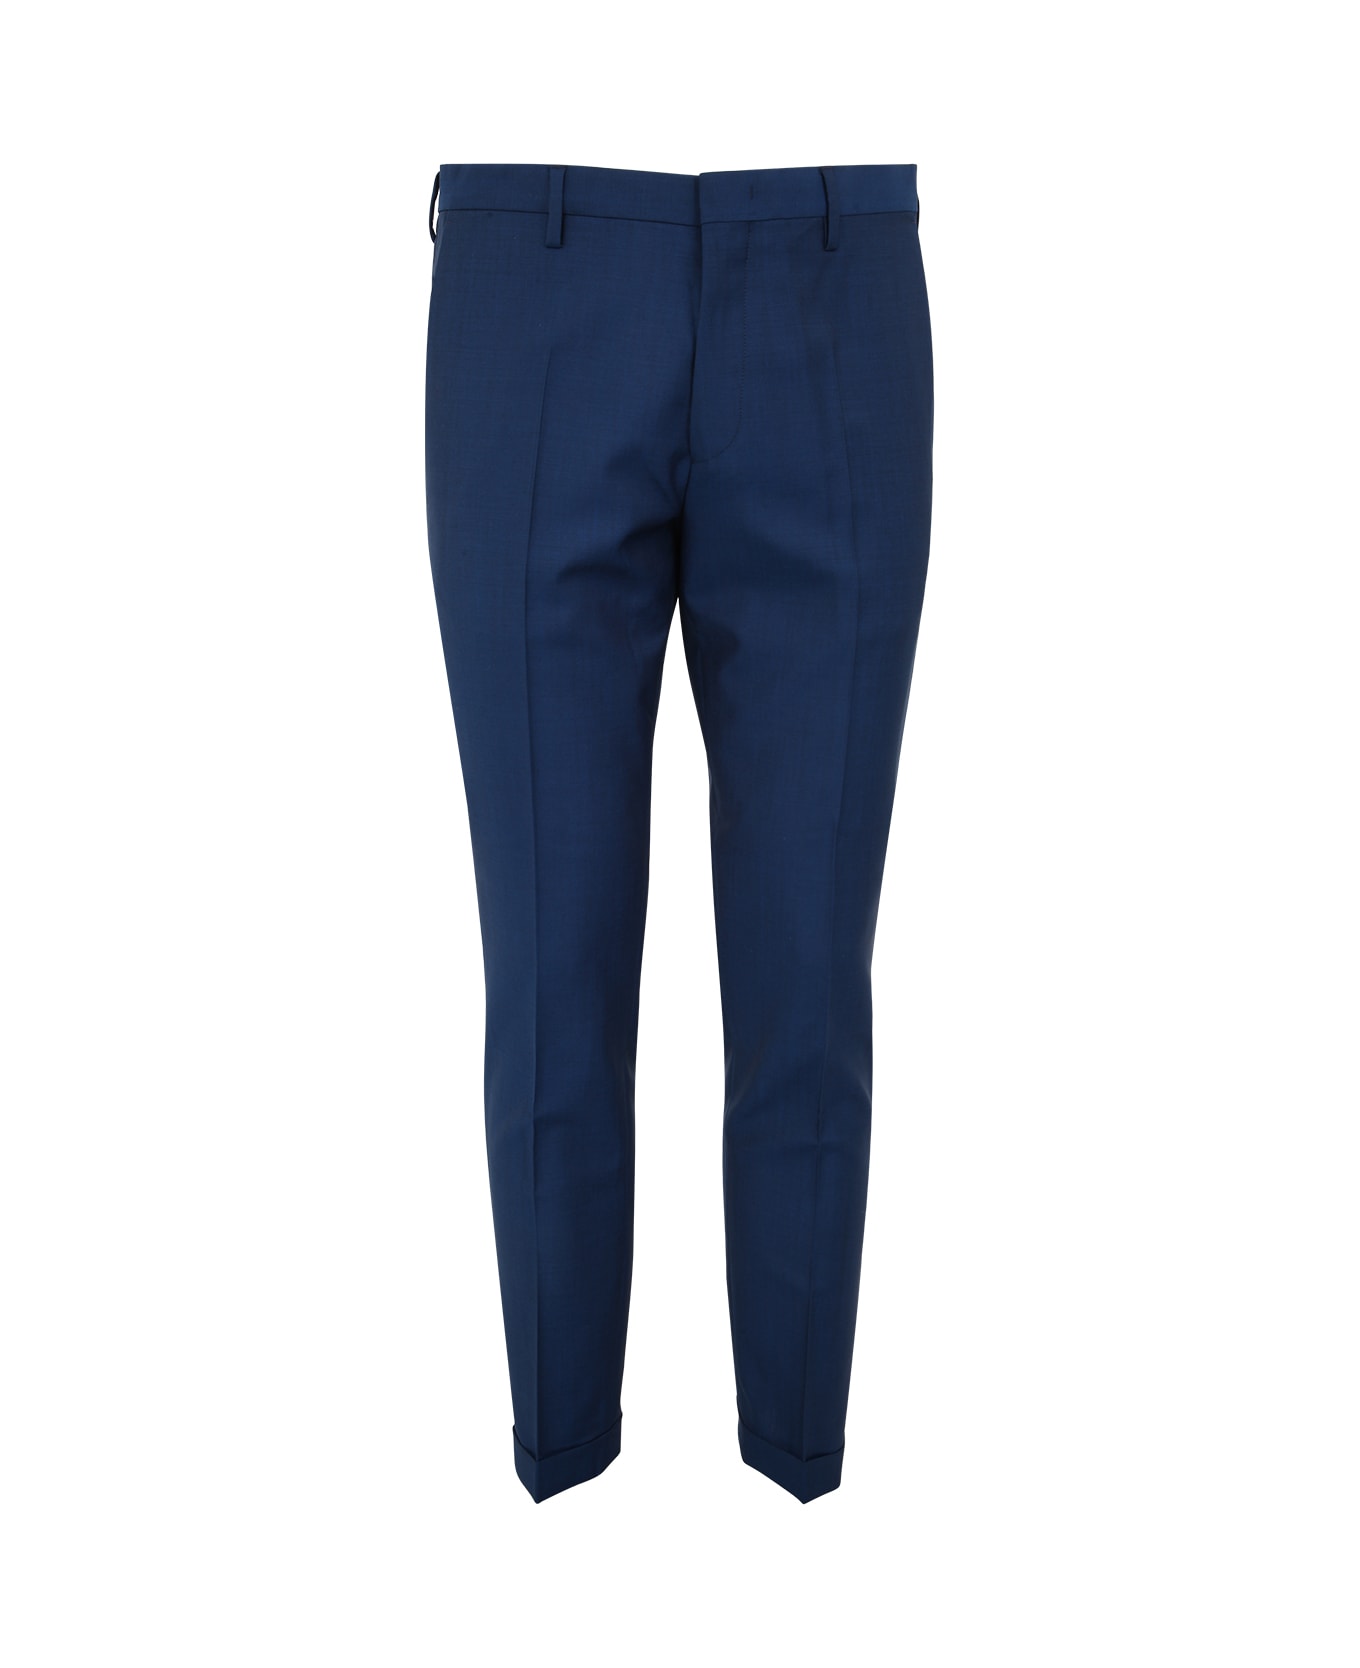 Paul Smith Mens Trousers - Blue ボトムス